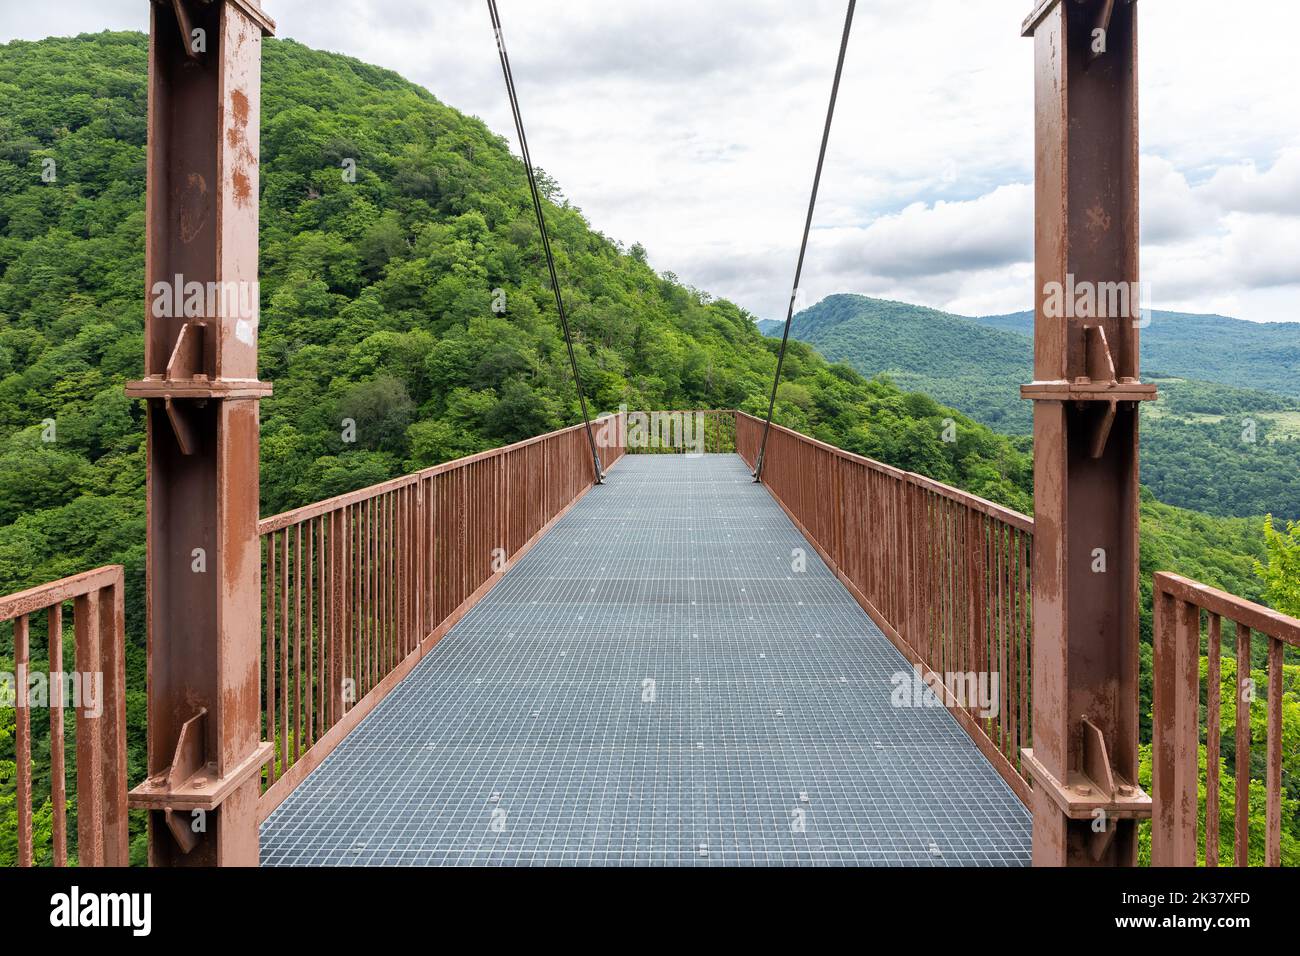 Metal hanging viewing platform above Okatse Canyon in Georgia, lush vegetation and forests, no people. Stock Photo